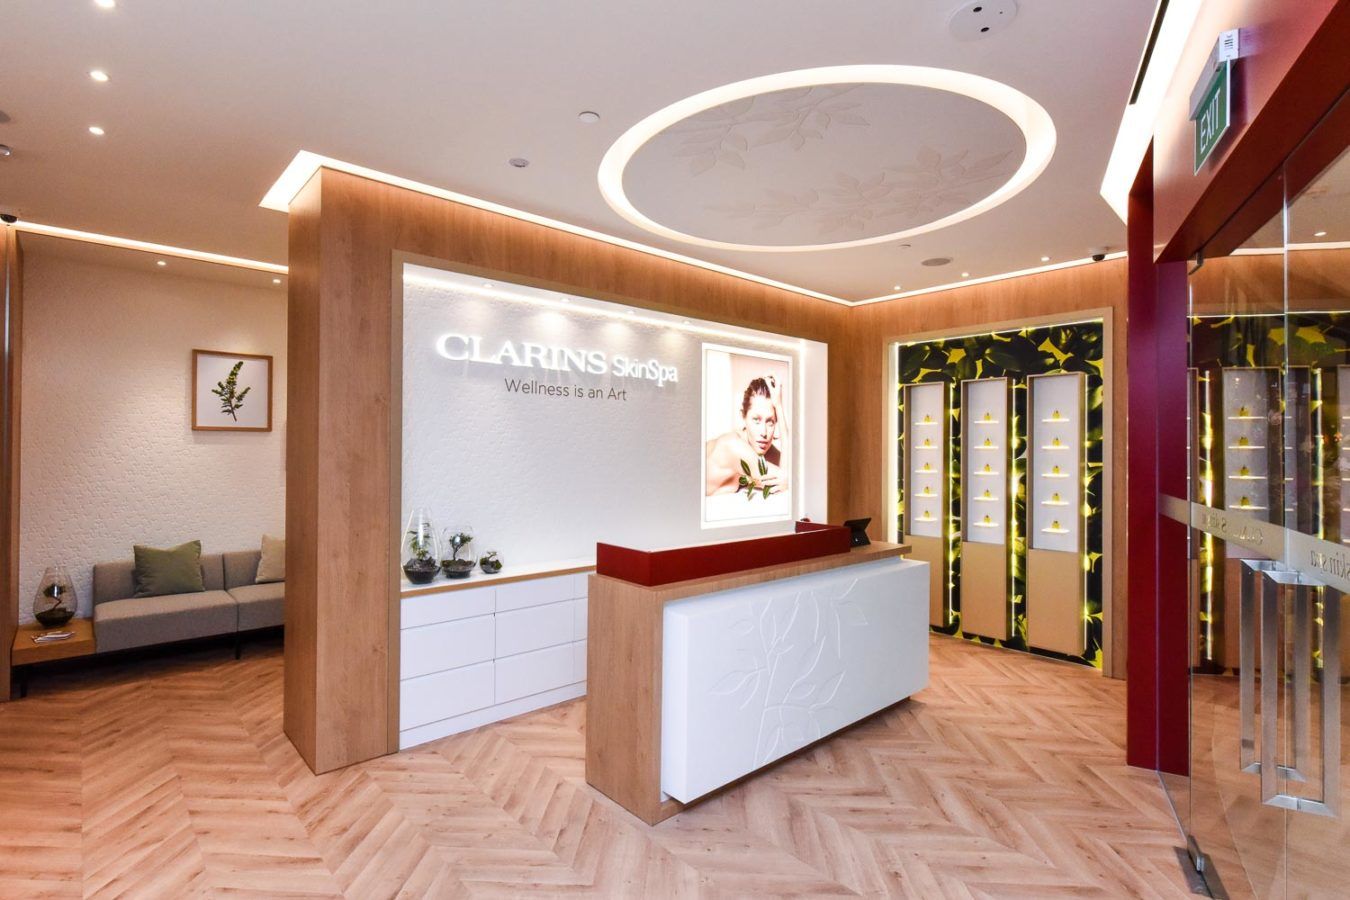 Clarins re-opens its specialised Skin Spa in ION Orchard